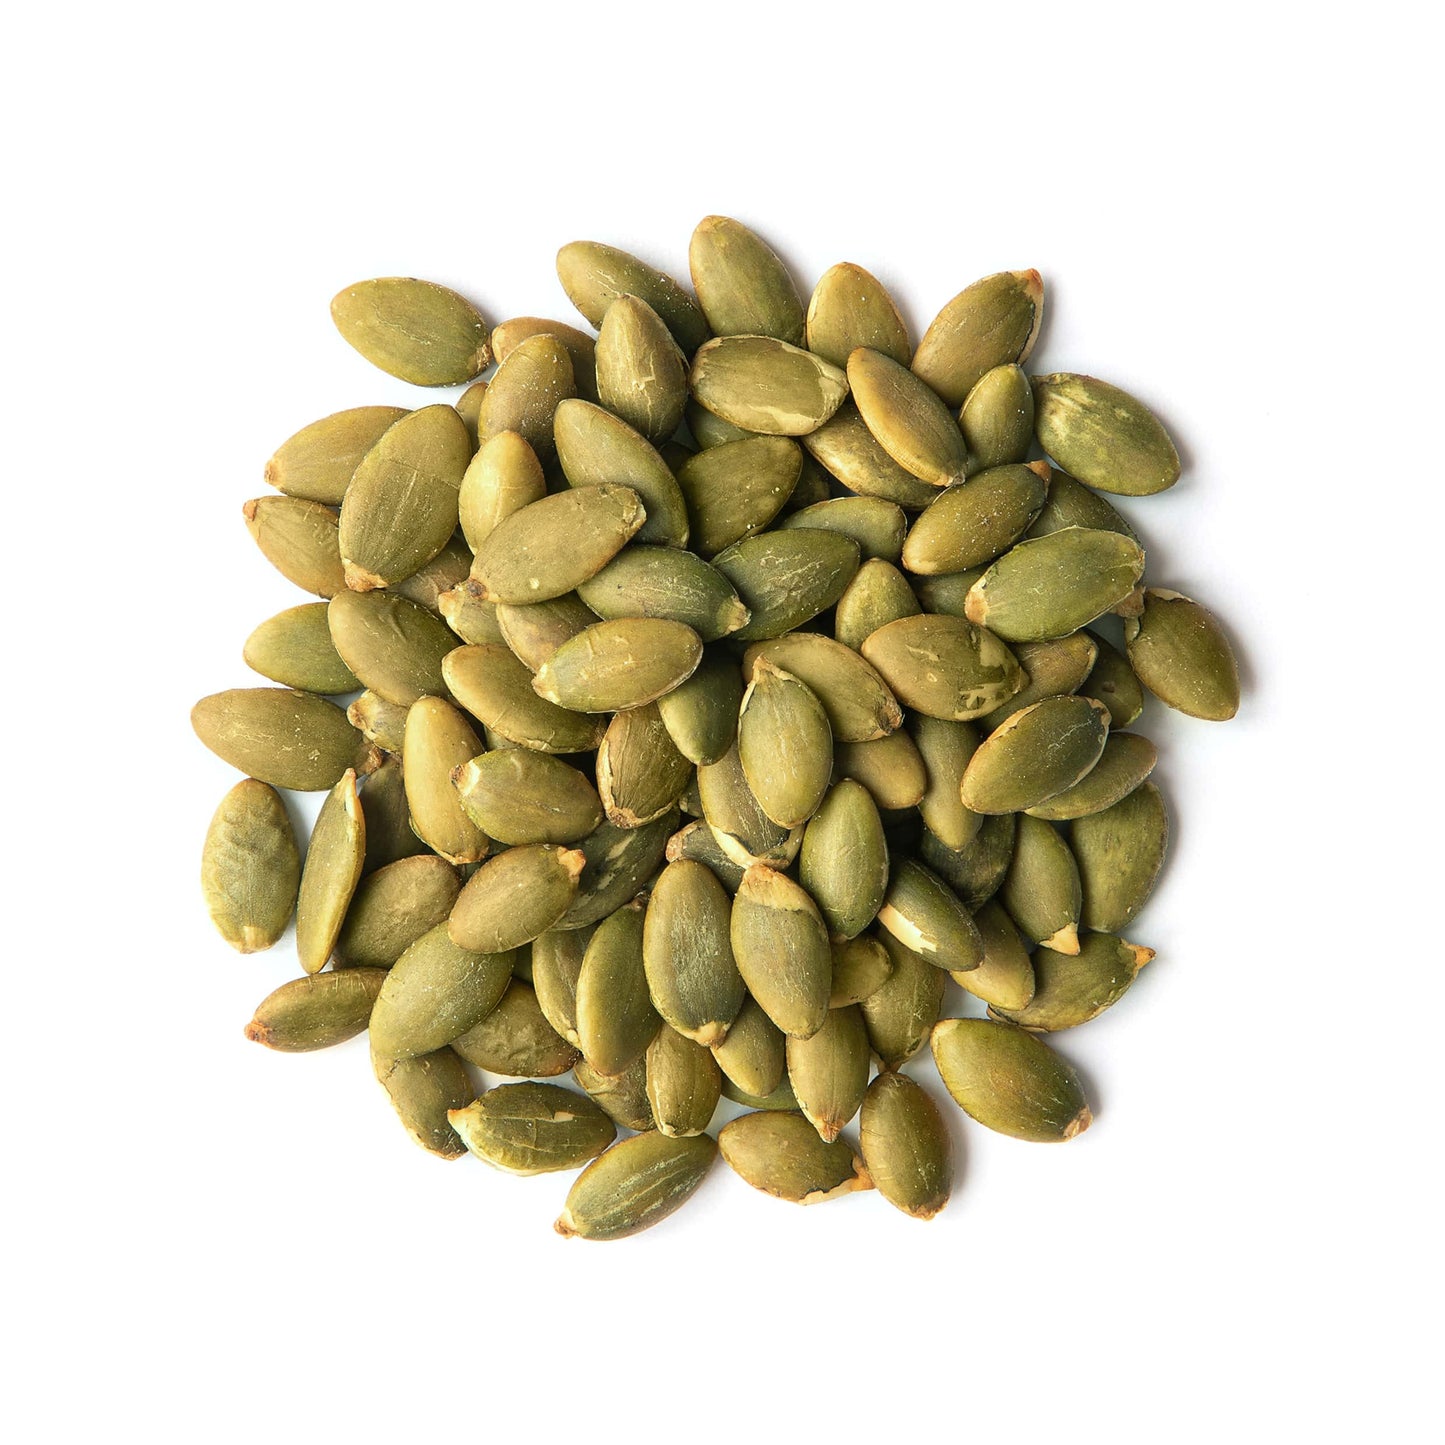 Organic Dry Roasted Pumpkin Seed Kernels - Non-GMO, Unsalted, Oven Roasted Whole Pepitas, No Oil Added, Shelled, Vegan, Kosher, Keto, Bulk. Low in Carbs. High In Protein. Great for Snacking